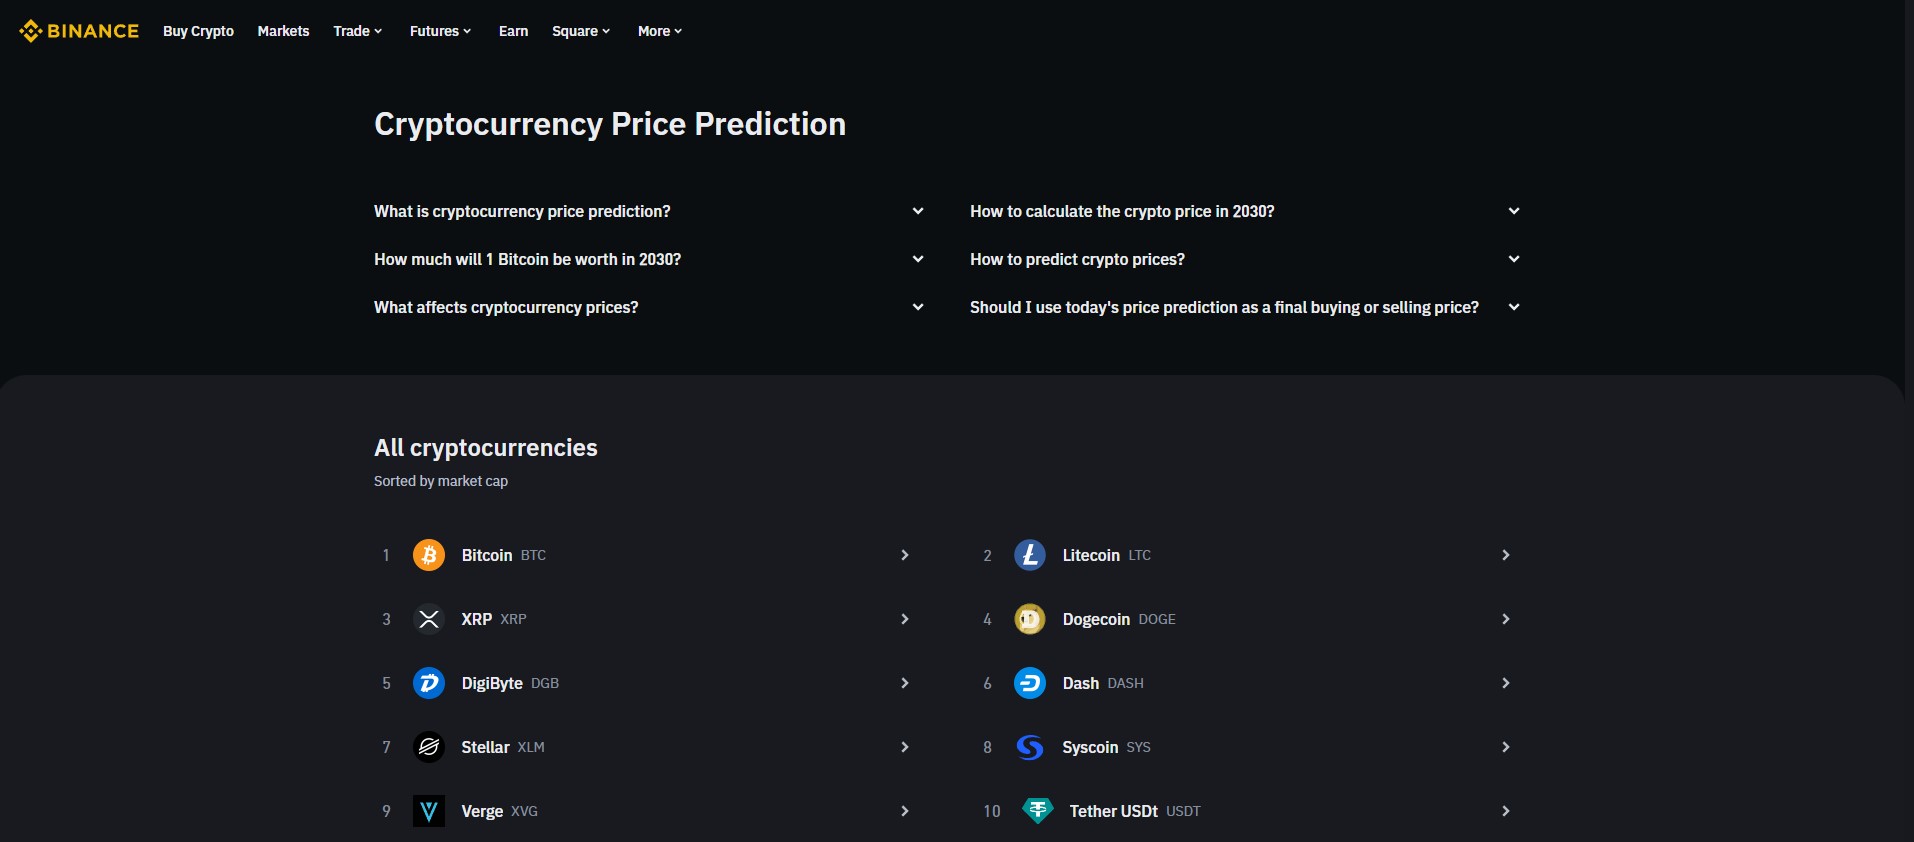 Binance Cryptocurrency Price Prediction Page